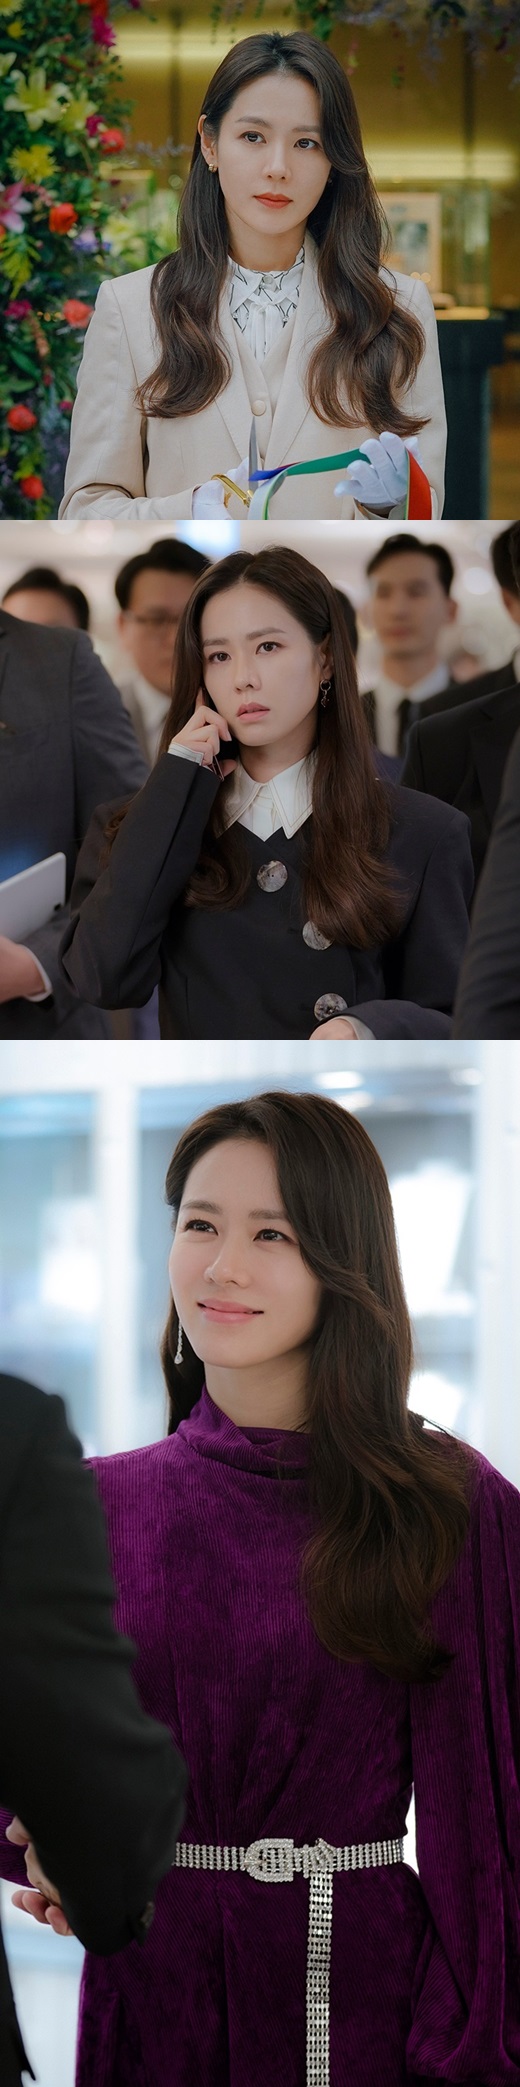 Actor Son Ye-jin reveals the aspect of a professional CEO in Loves Unstoppable.Cable Channel tvN The new Saturday drama The Unstoppable of Love is a romance of the chaebol heiress Yoon Serri (Son Ye-jin), who landed in North Korea with a gust of wind one day, and the North Korean officer Lee Jung Hyuk (Hyun Bin), who hides and loves her.Yoon Serri, who Son Ye-jin tried to transform, is a business woman who demonstrates charisma as a representative of fashion brand.Yoon Serri, who runs the success road, successfully launches his brand and expands his business, while radiating an aura that can not be tolerated as the top CEO of a listed company.Son Ye-jin, who was released today (6th), is dressed up in luxurious styling that matches the character and has a different atmosphere.In the scene of shaking hands with a gentle smile, it shows simple but colorful styling with a purple velvet one piece, bling bling belt and drop earrings.In the tape cutting scene of the opening event, the creamy chic suit is decorated with the image of the foreign oil in the oil, and the suit, which is a big button, emits the charisma of issue maker instead of the heavy atmosphere of the scene.Yoon Serri, who has been running the success path in the unstoppable love, is attracting attention as to what kind of development will be unfolded after the unexpected weather change.Son Ye-jins hottest performance, which will capture the house theater with a talented heiress Yoon Serri, can be seen at the Love Unstoppable broadcasted at 9 pm on the 14th.